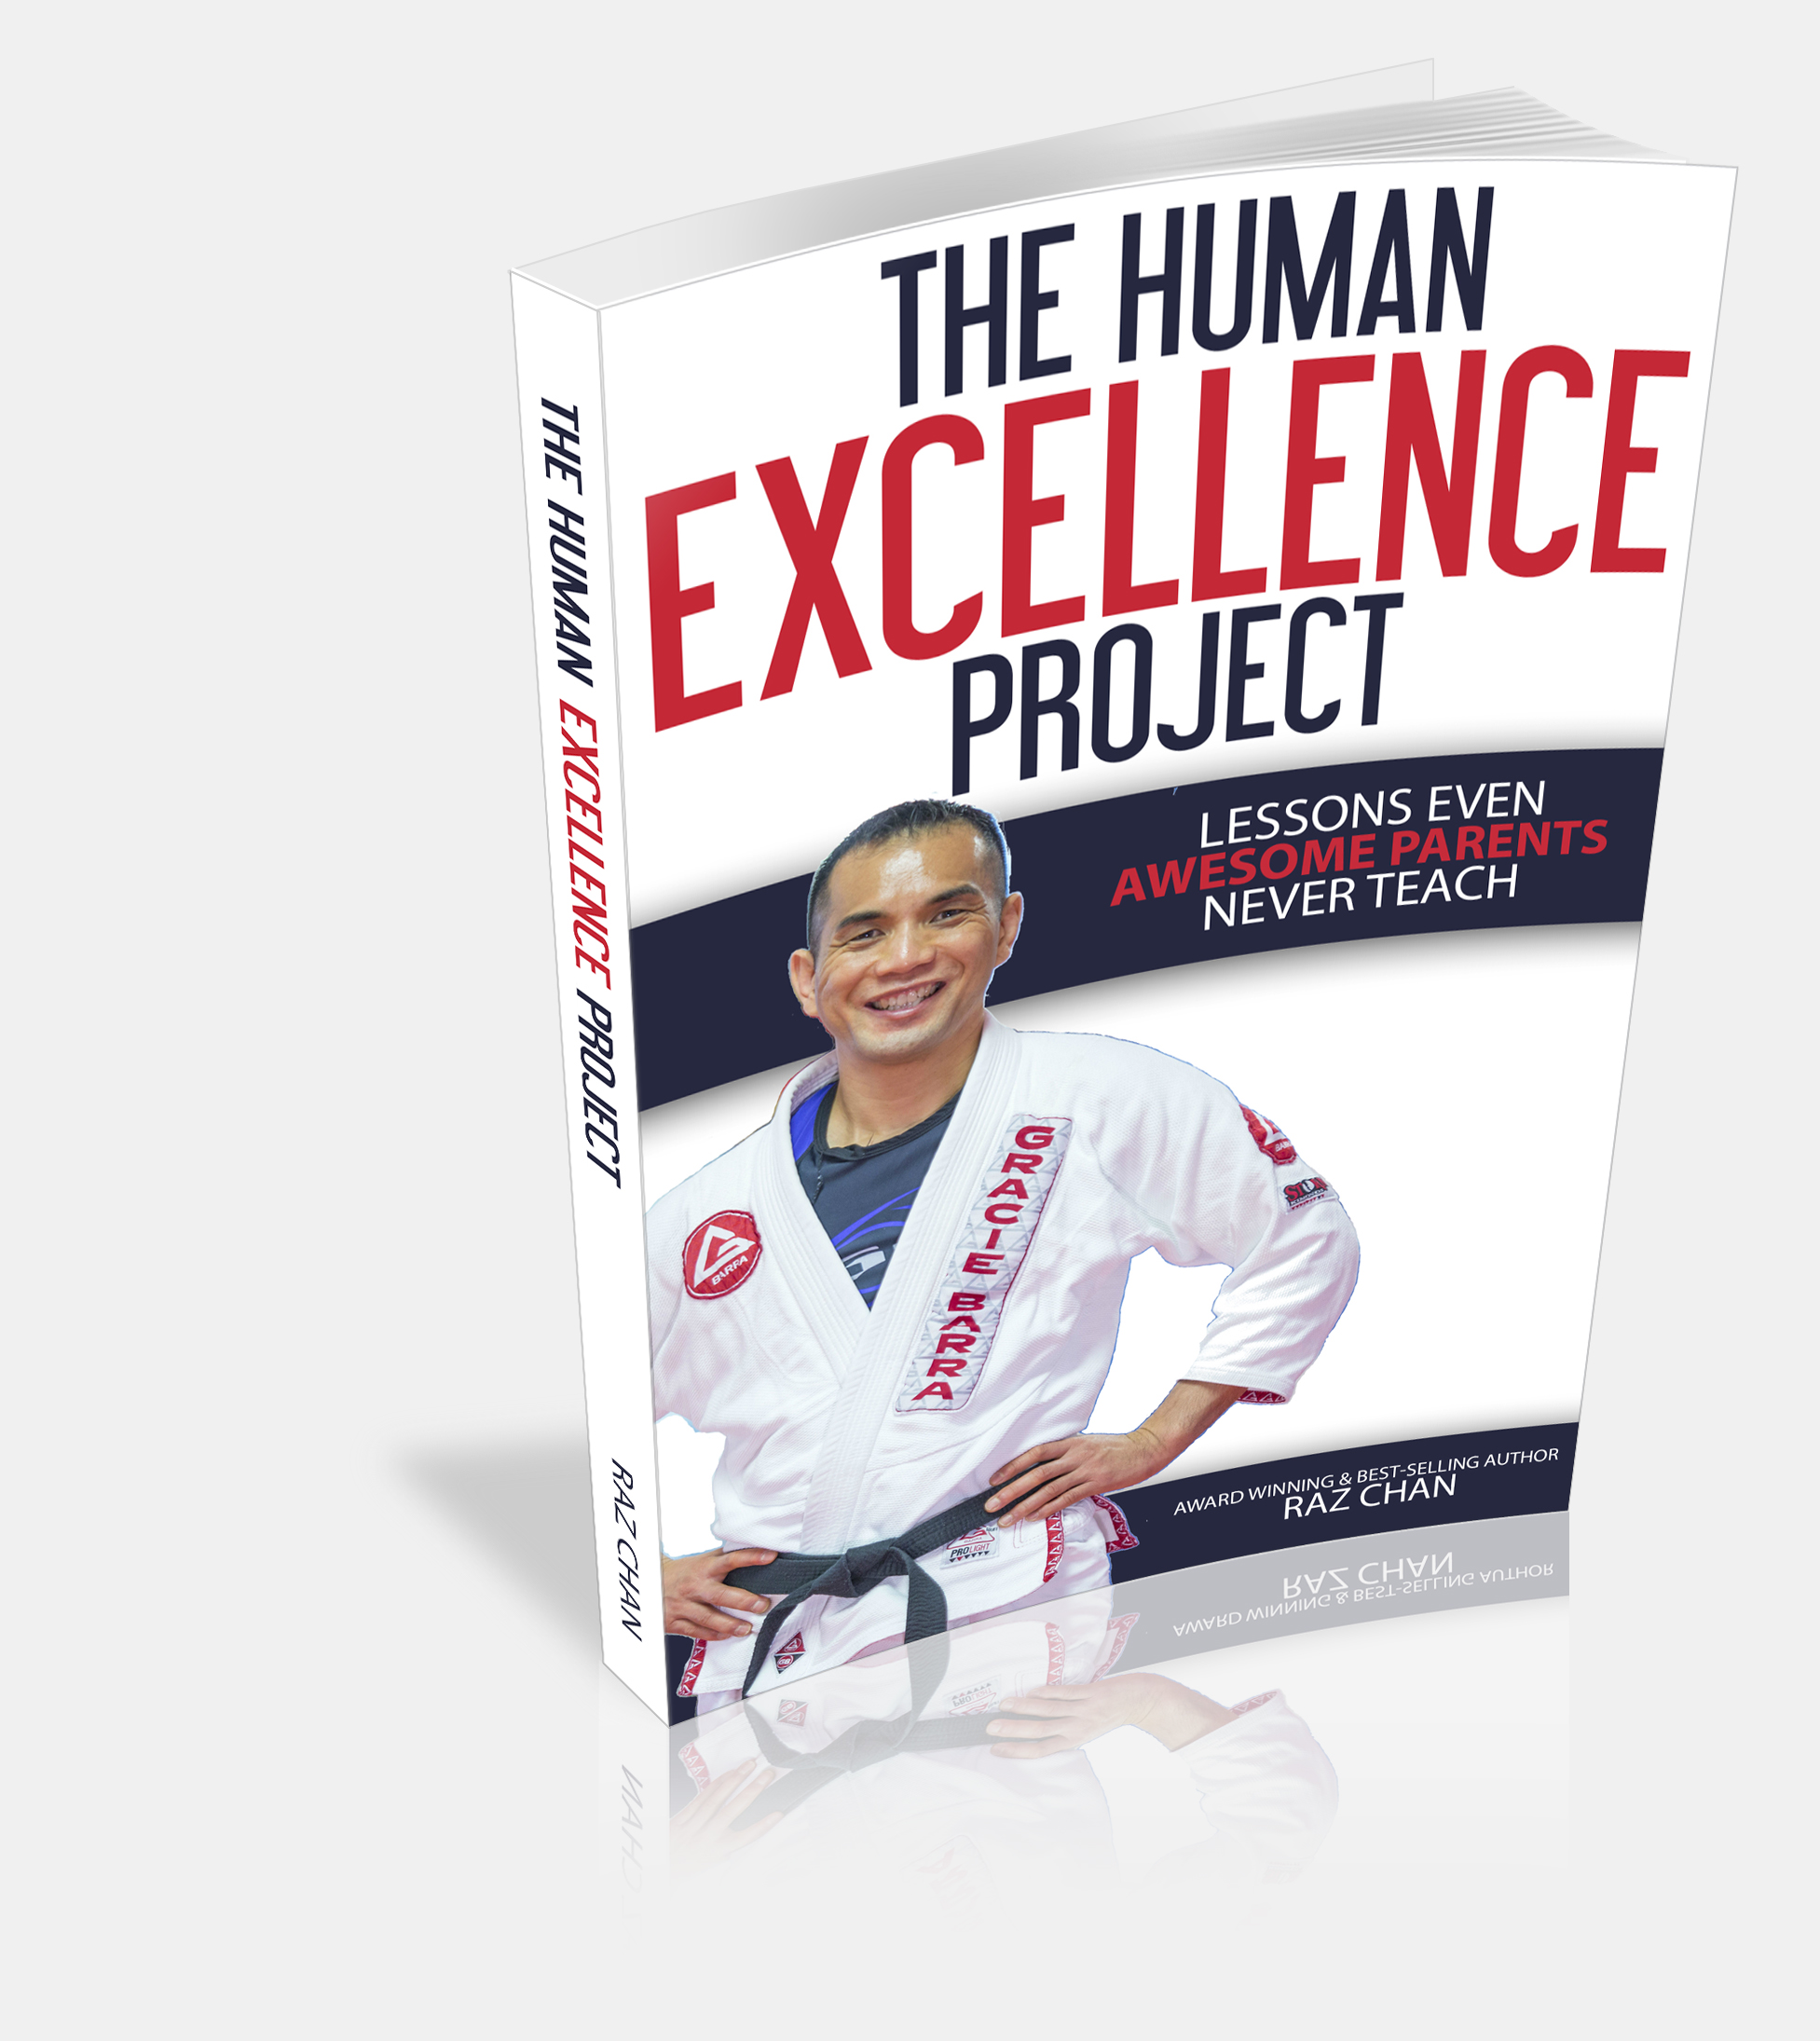 The Human Excellence Project book cover